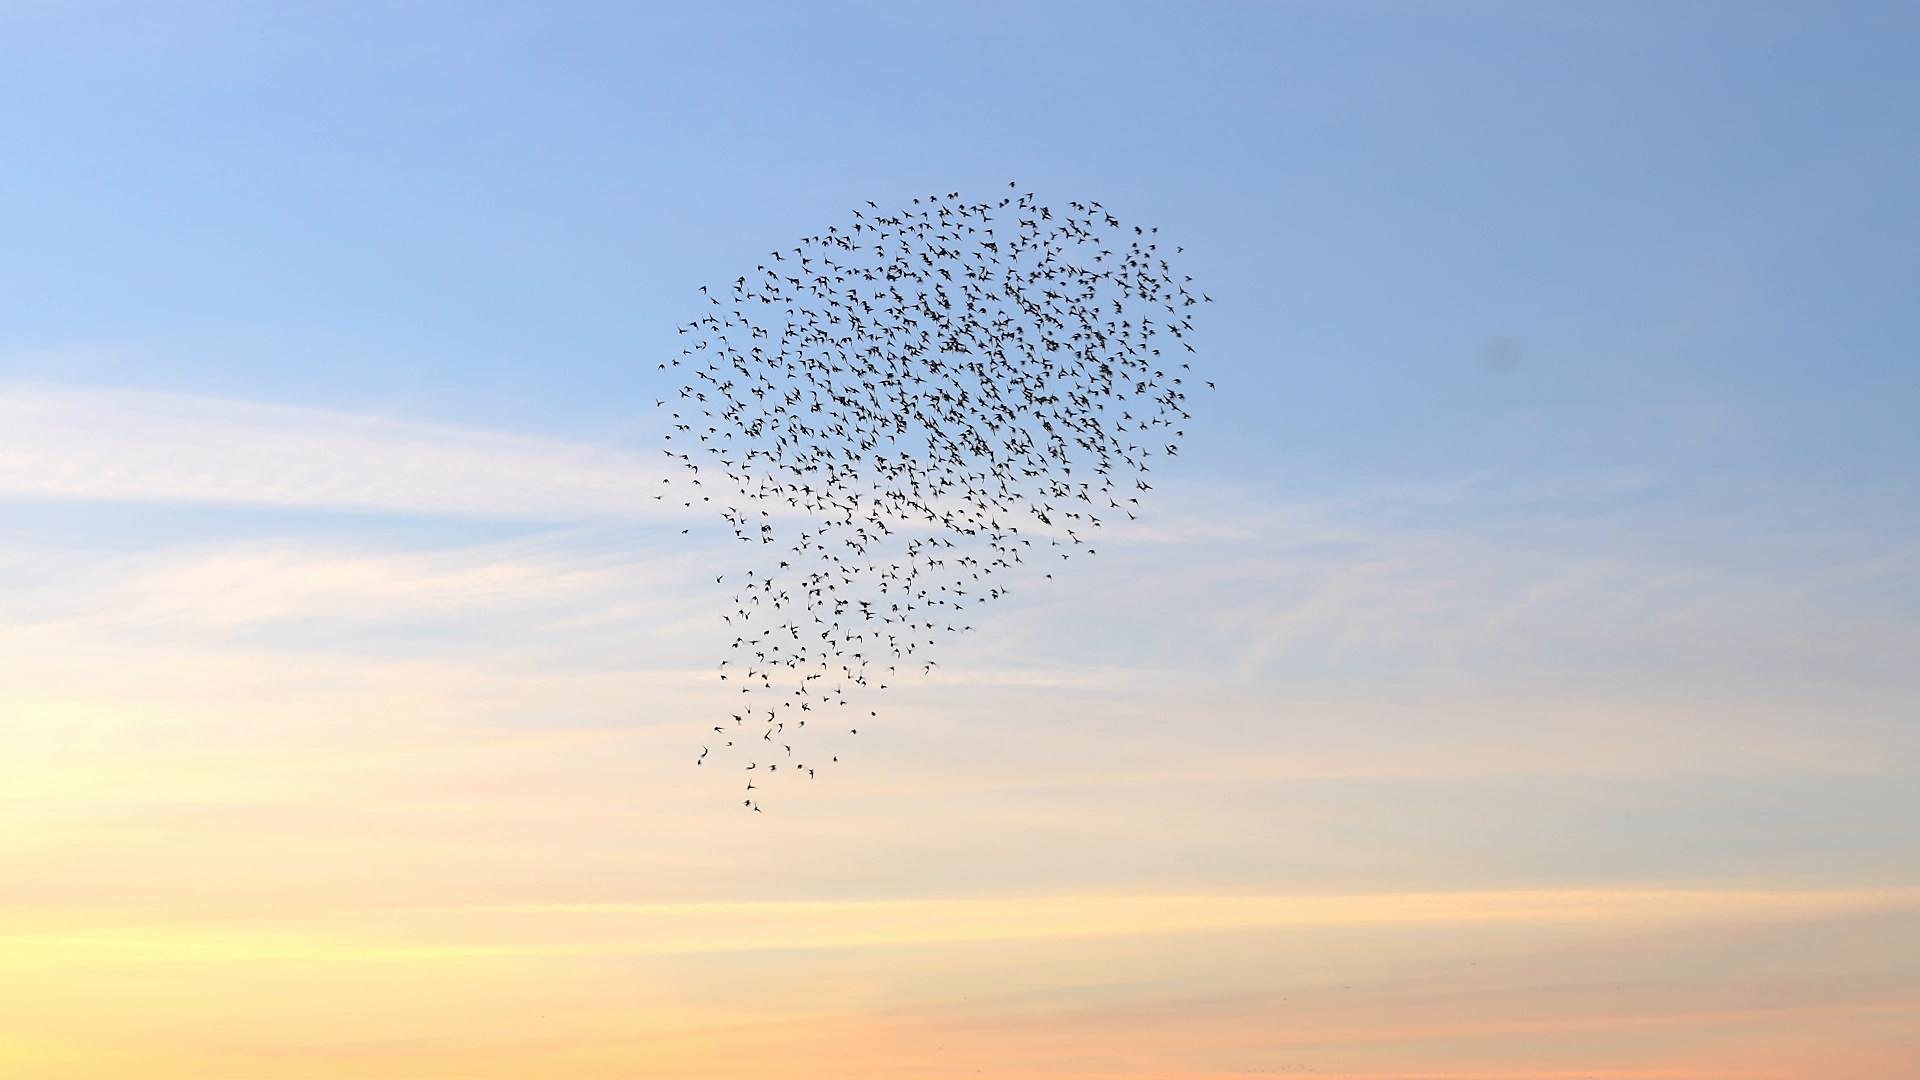 Awesome Starling Show in Denmark’s Marshlands